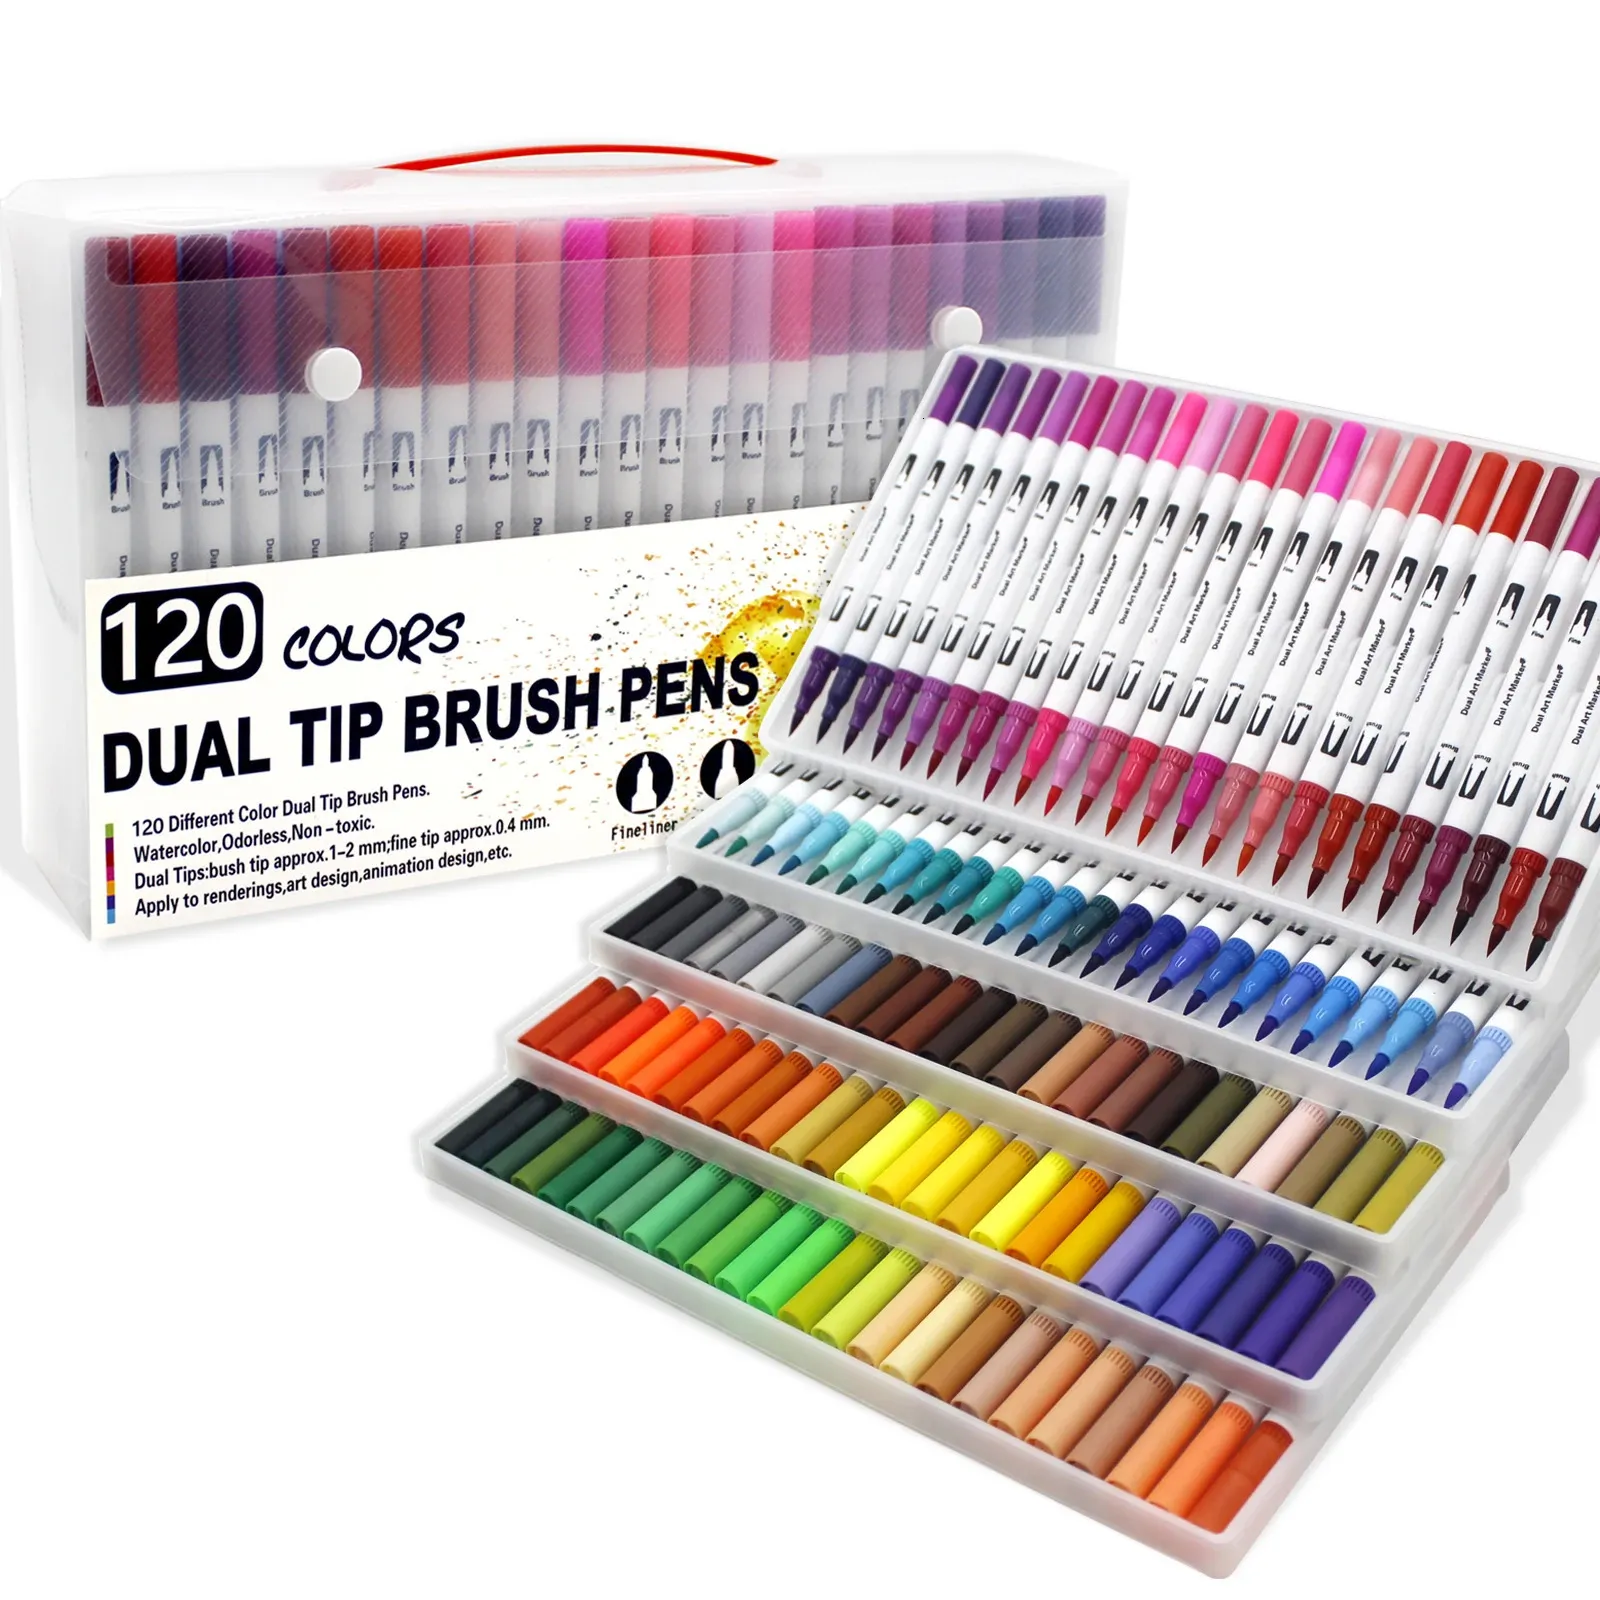 Water Colour Brush Pens For Coloring, Painting, 12 Colour